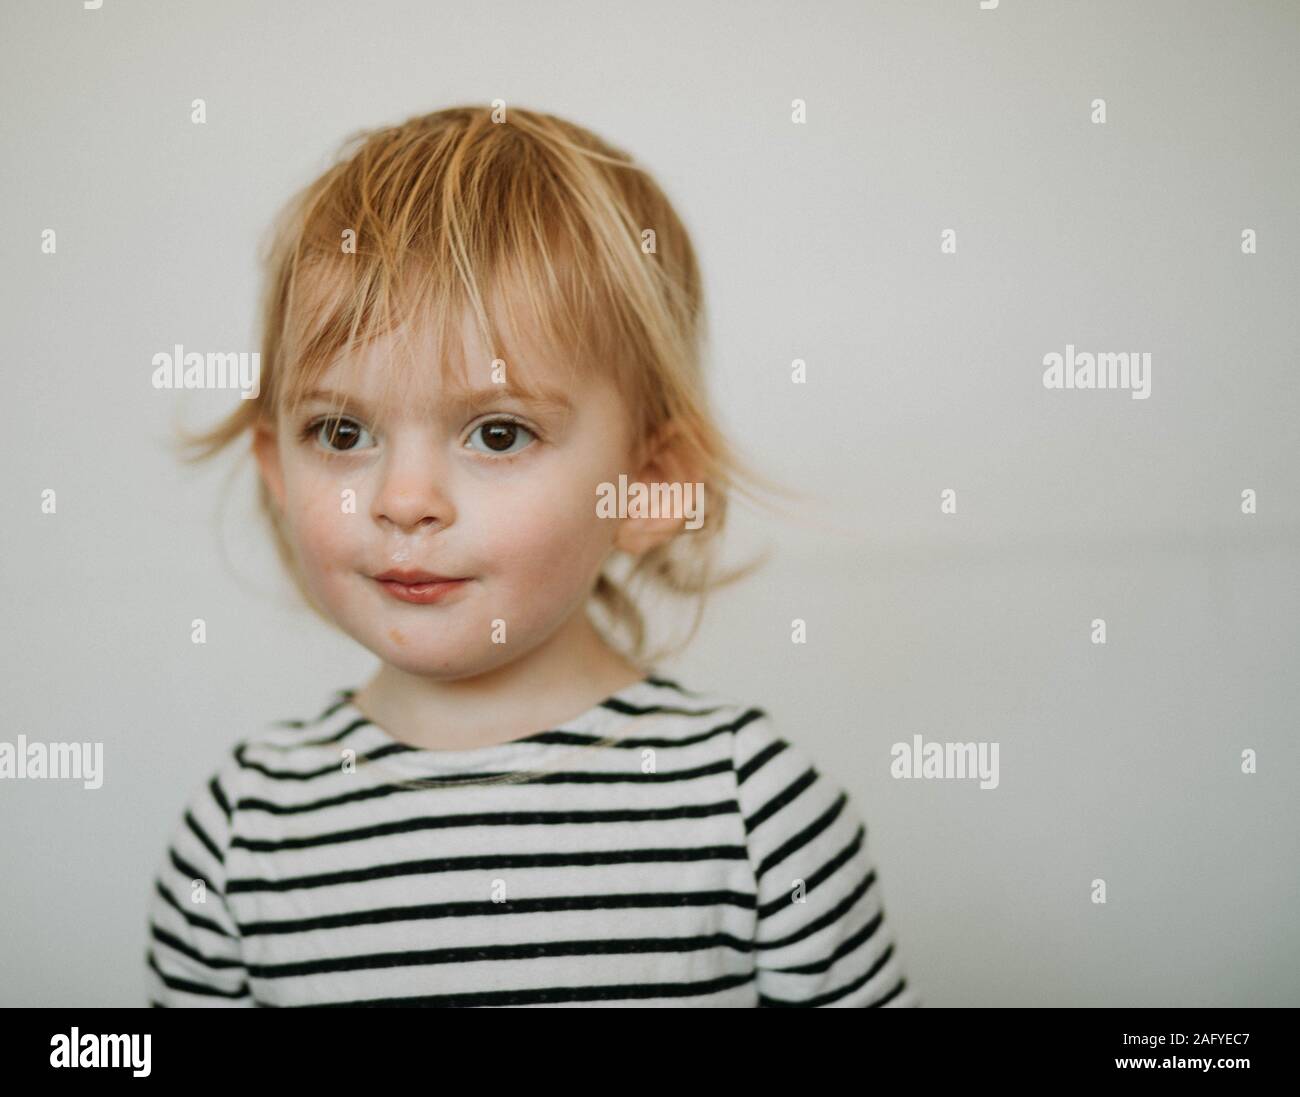 portrait of toddler against white background Stock Photo